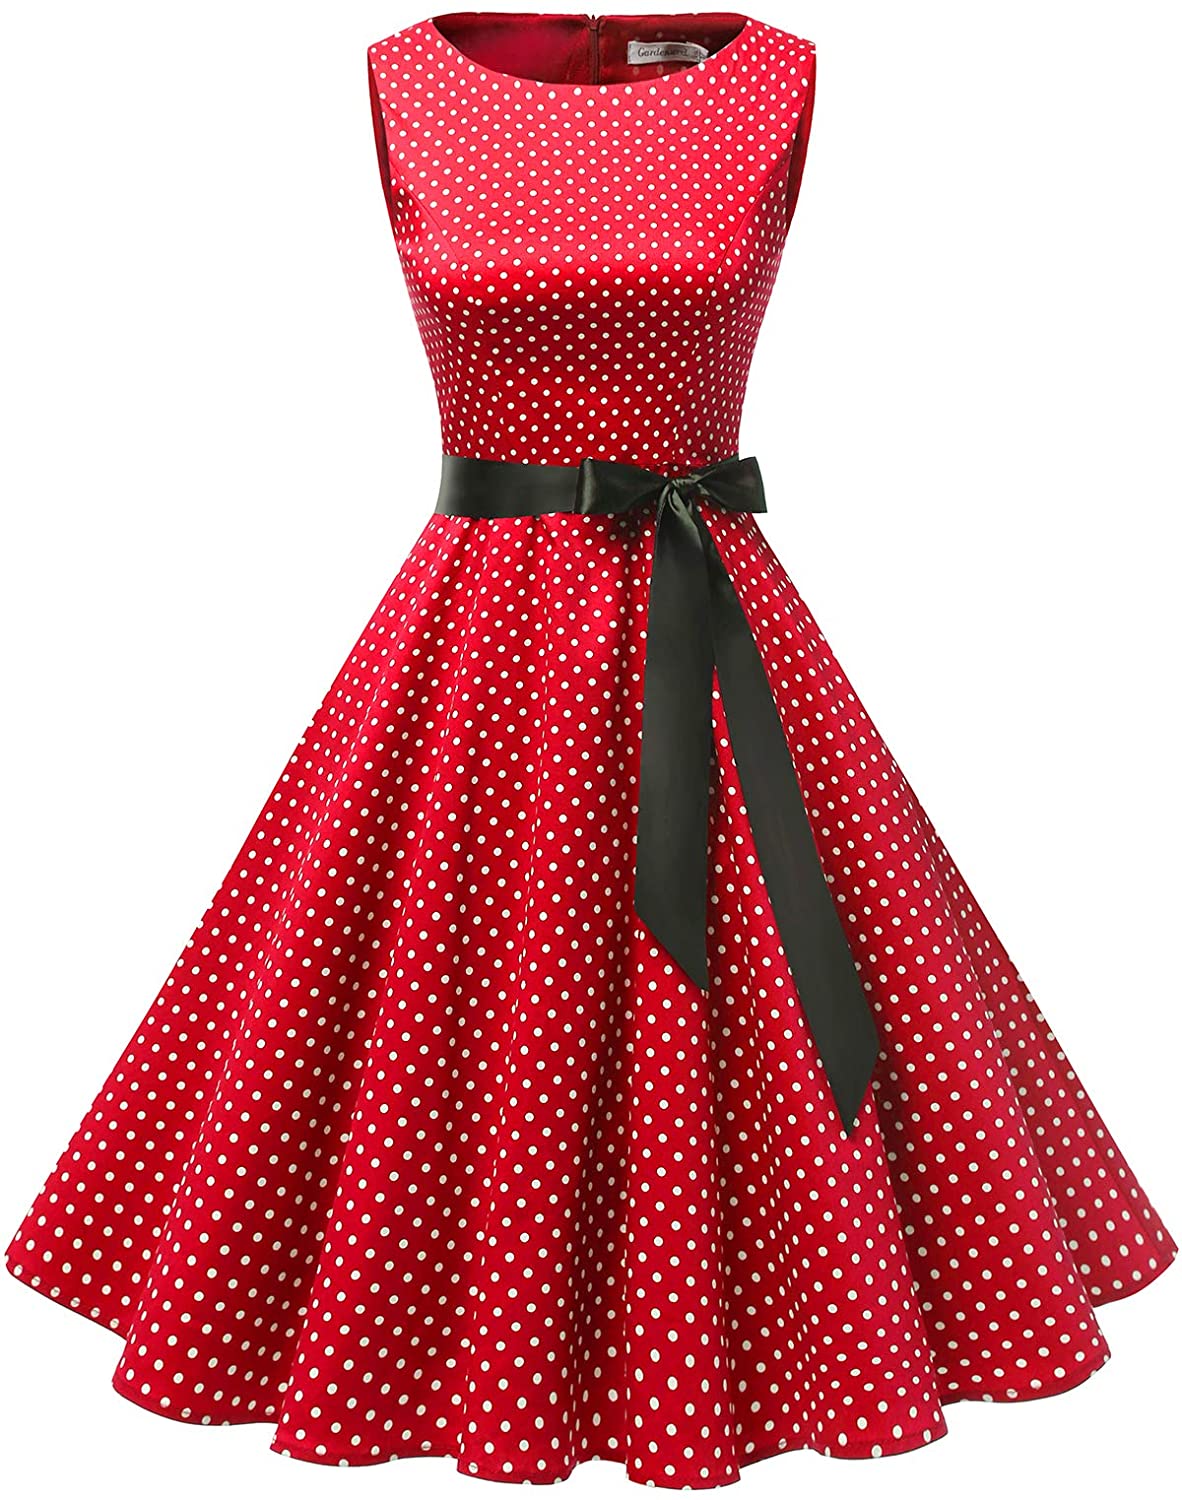 Retro Halter Rockabilly Pure Color Bowknot Audrey Dress Cocktail Dress Swing Dresses Hotsell〔☀ㄥ☀〕1950s Dress for Women 